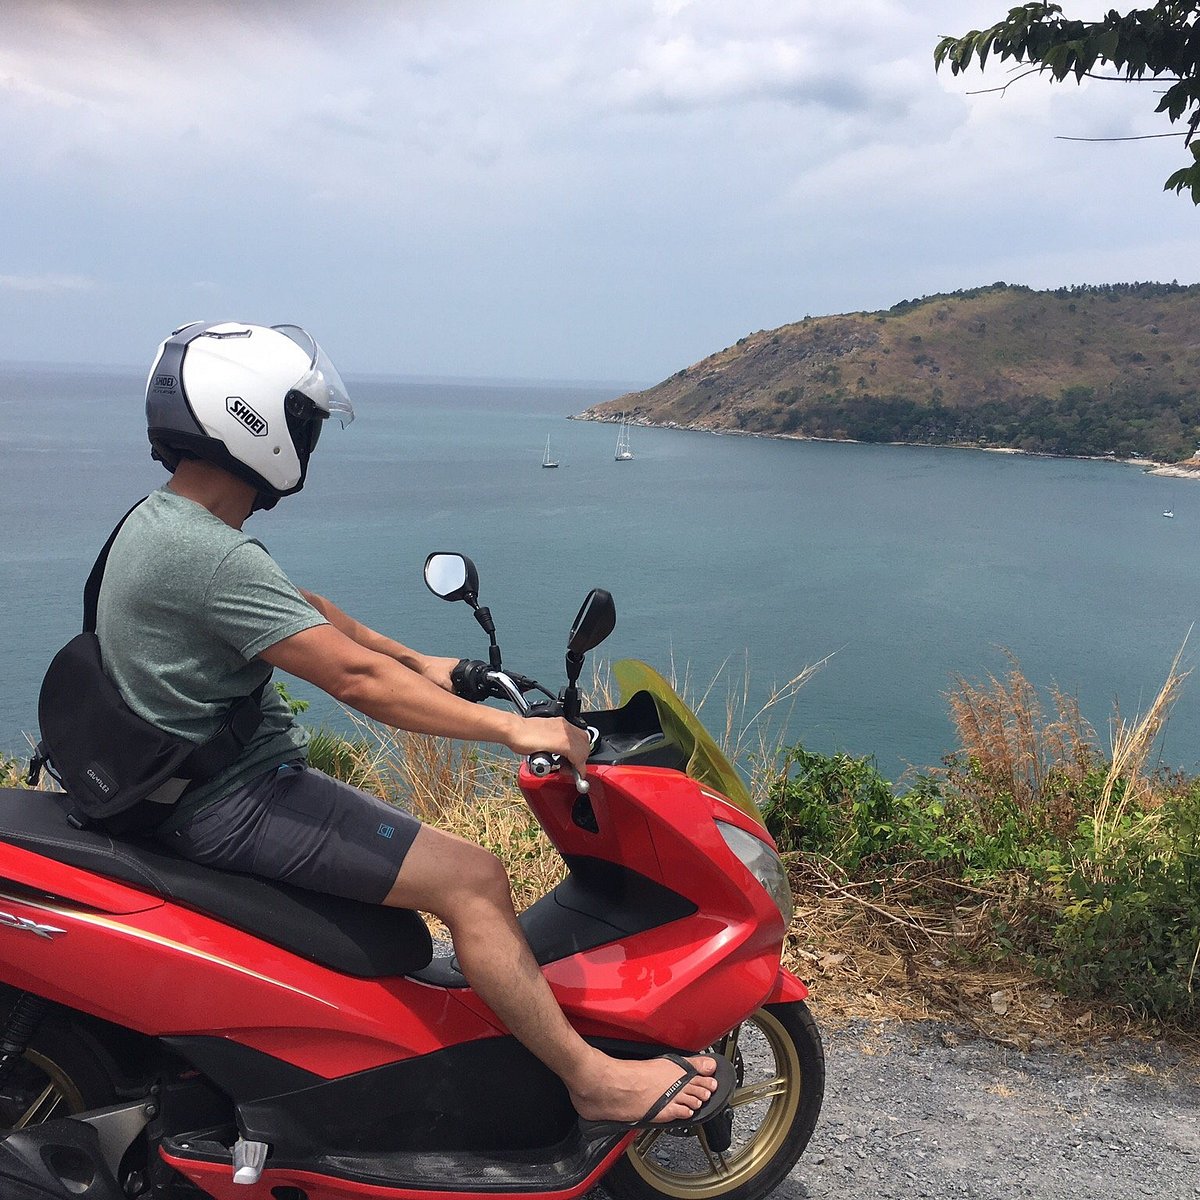 Cheap as Chips Phuket Motorbike Rental (Patong) - You Need to Know BEFORE You Go